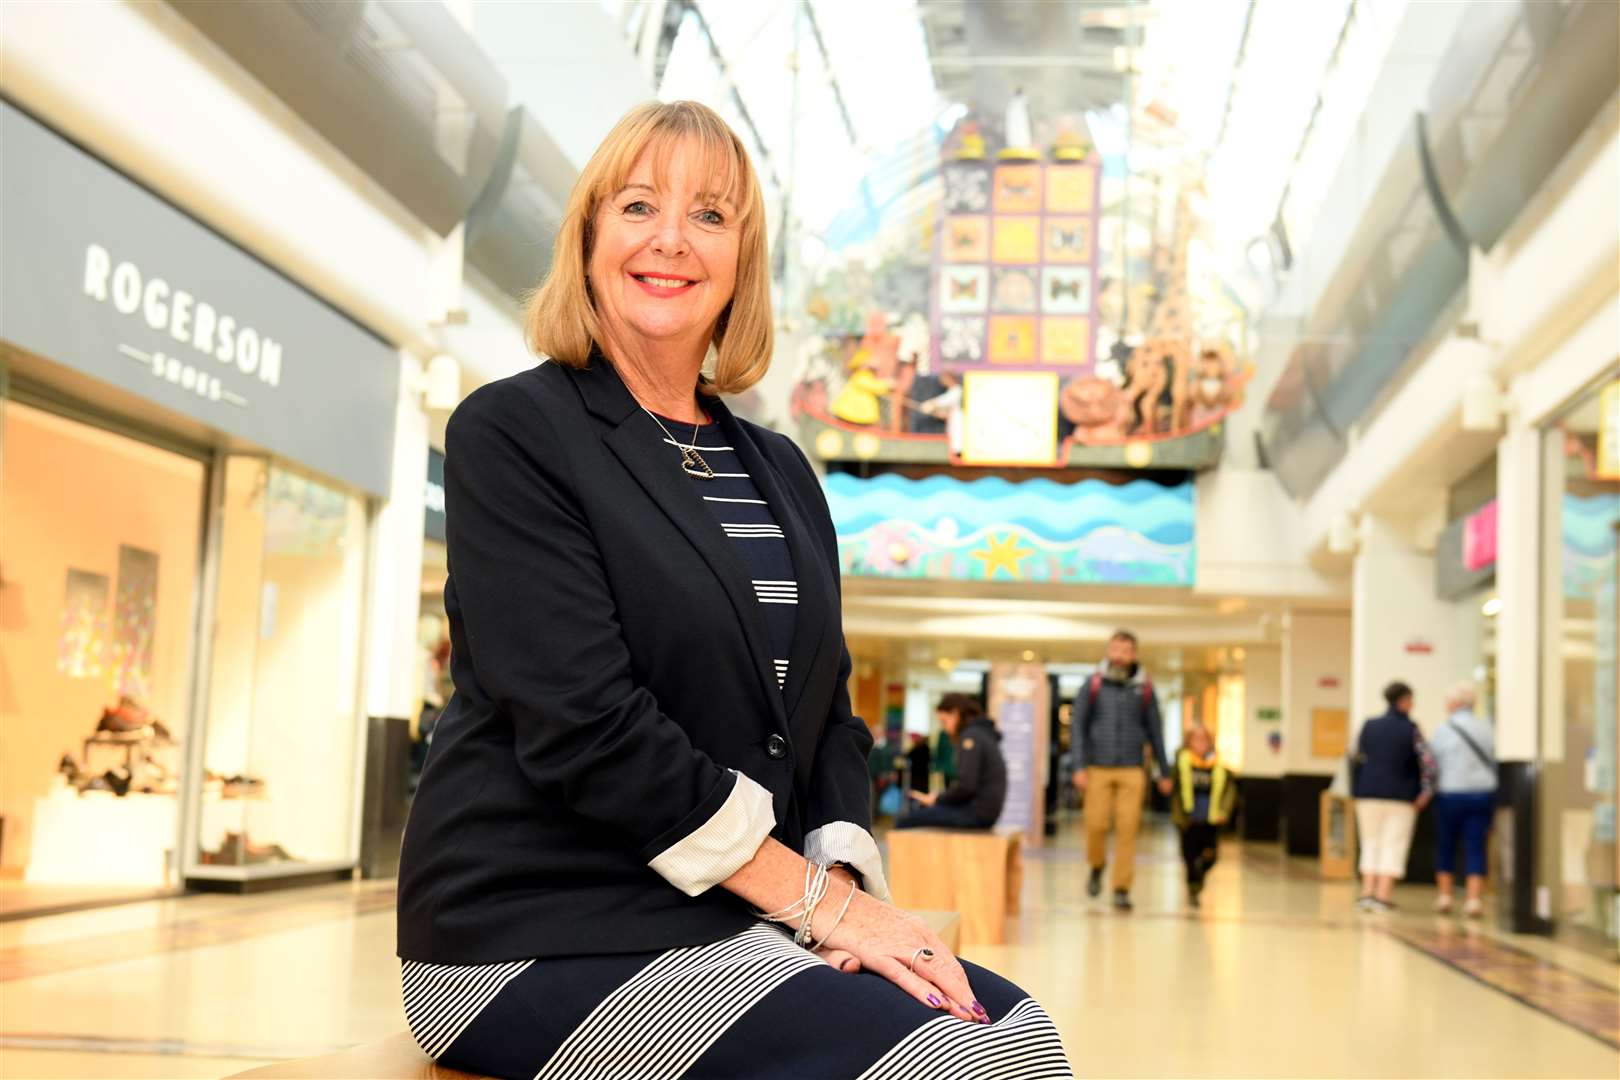 Jackie Cuddy has been manager at the shopping centre for 18 years.